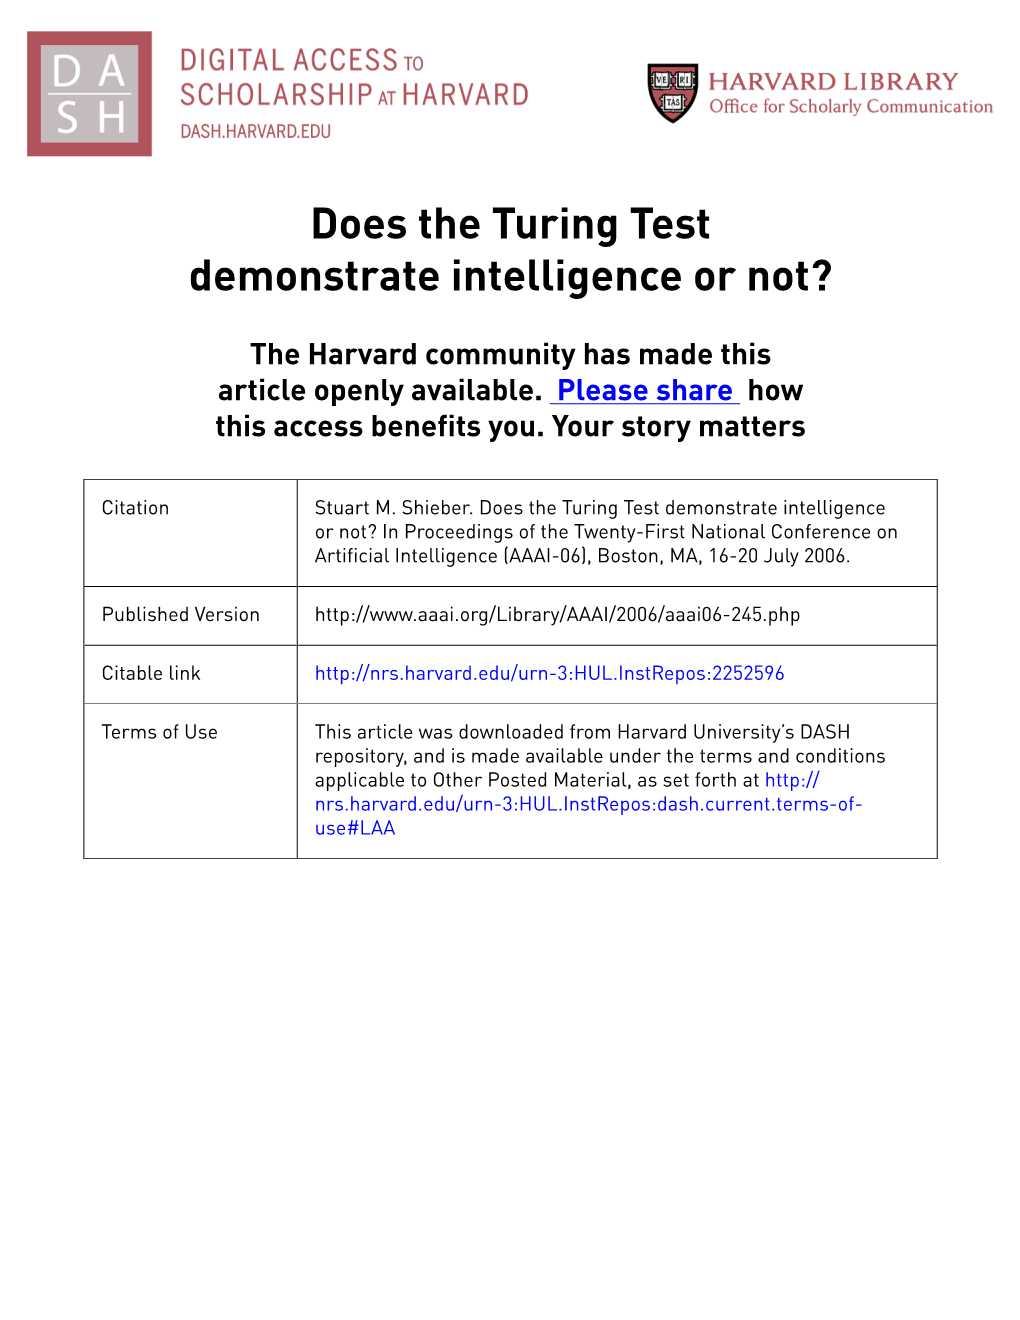 Does the Turing Test Demonstrate Intelligence Or Not?